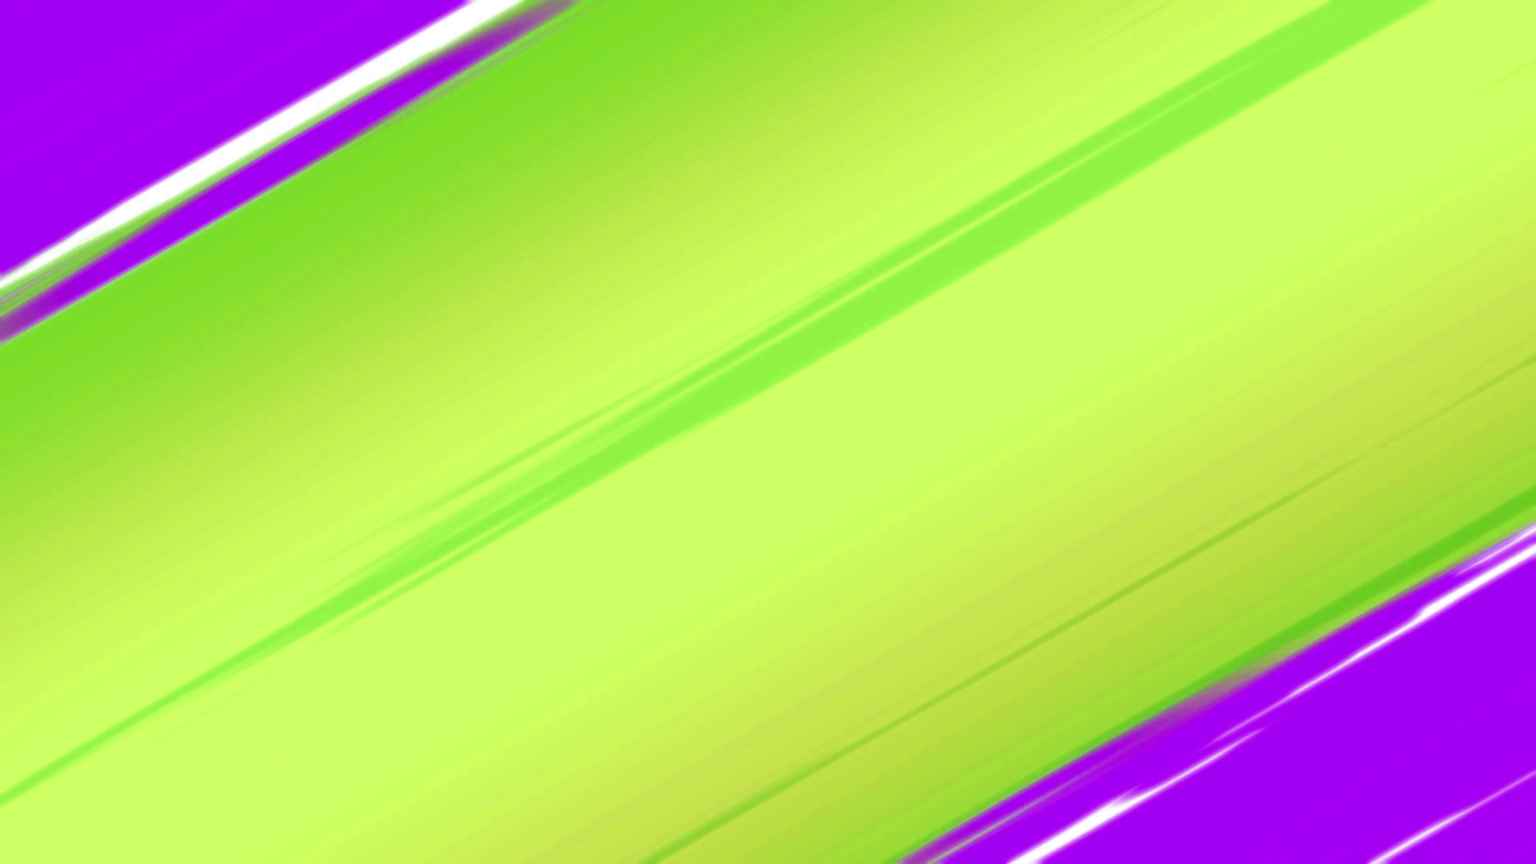 4K Purple & Lime Green Speedlines Free To Use Motion Background || UHD Screensaver Free Download